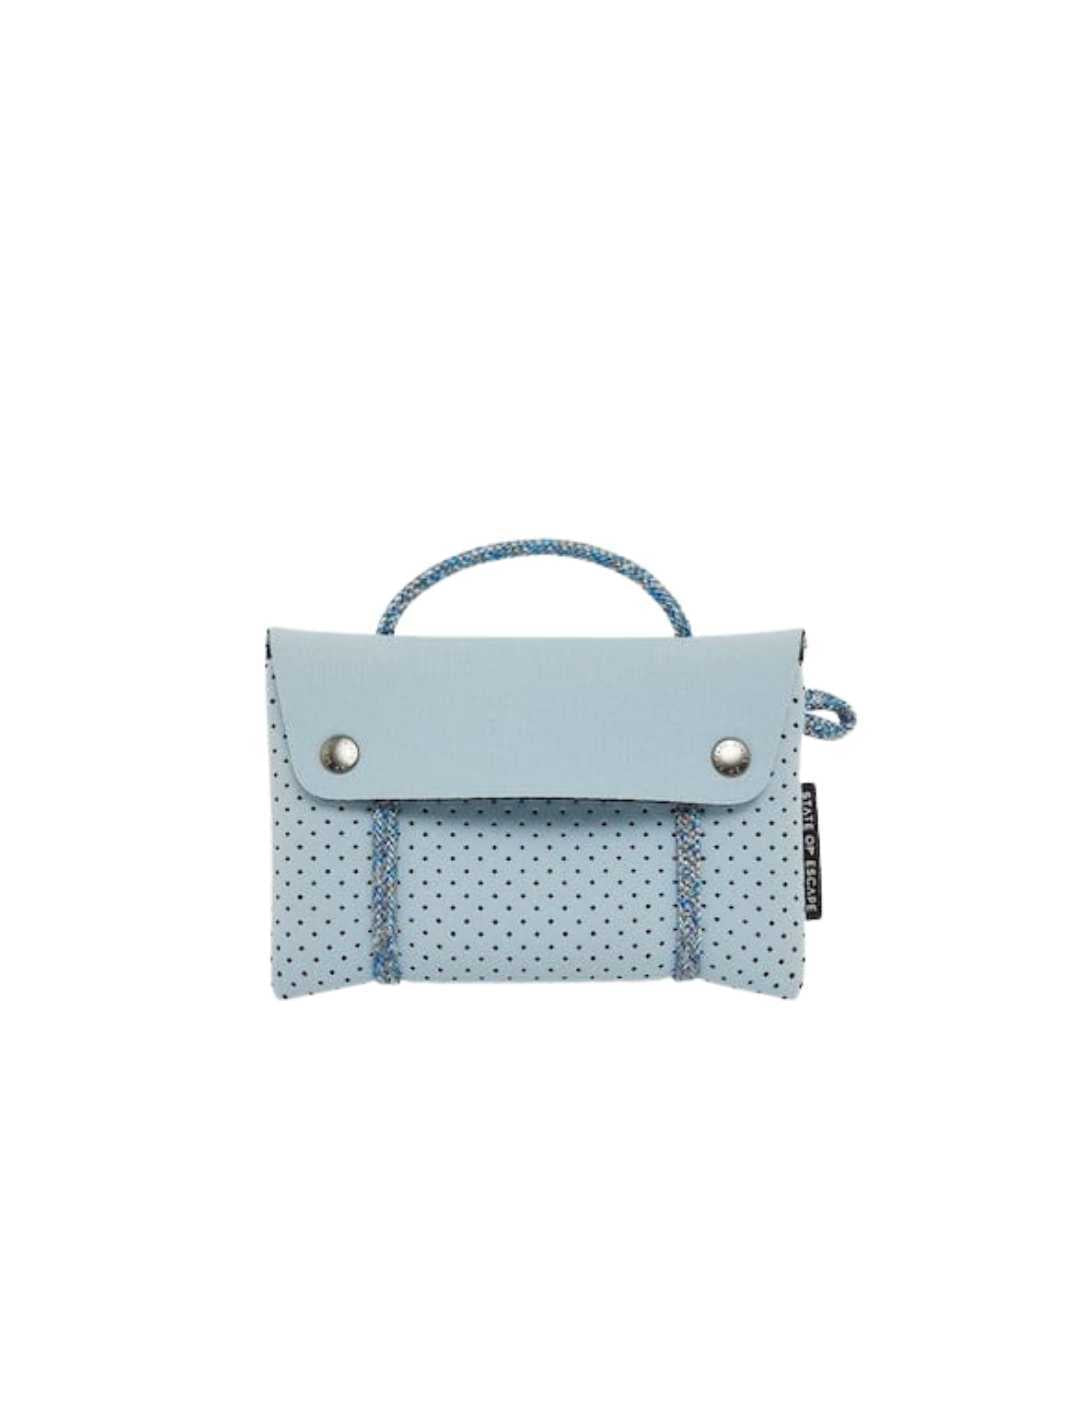 State of Escape Bags Baby Blue Bag | Compass Belt Bag Baby Blue